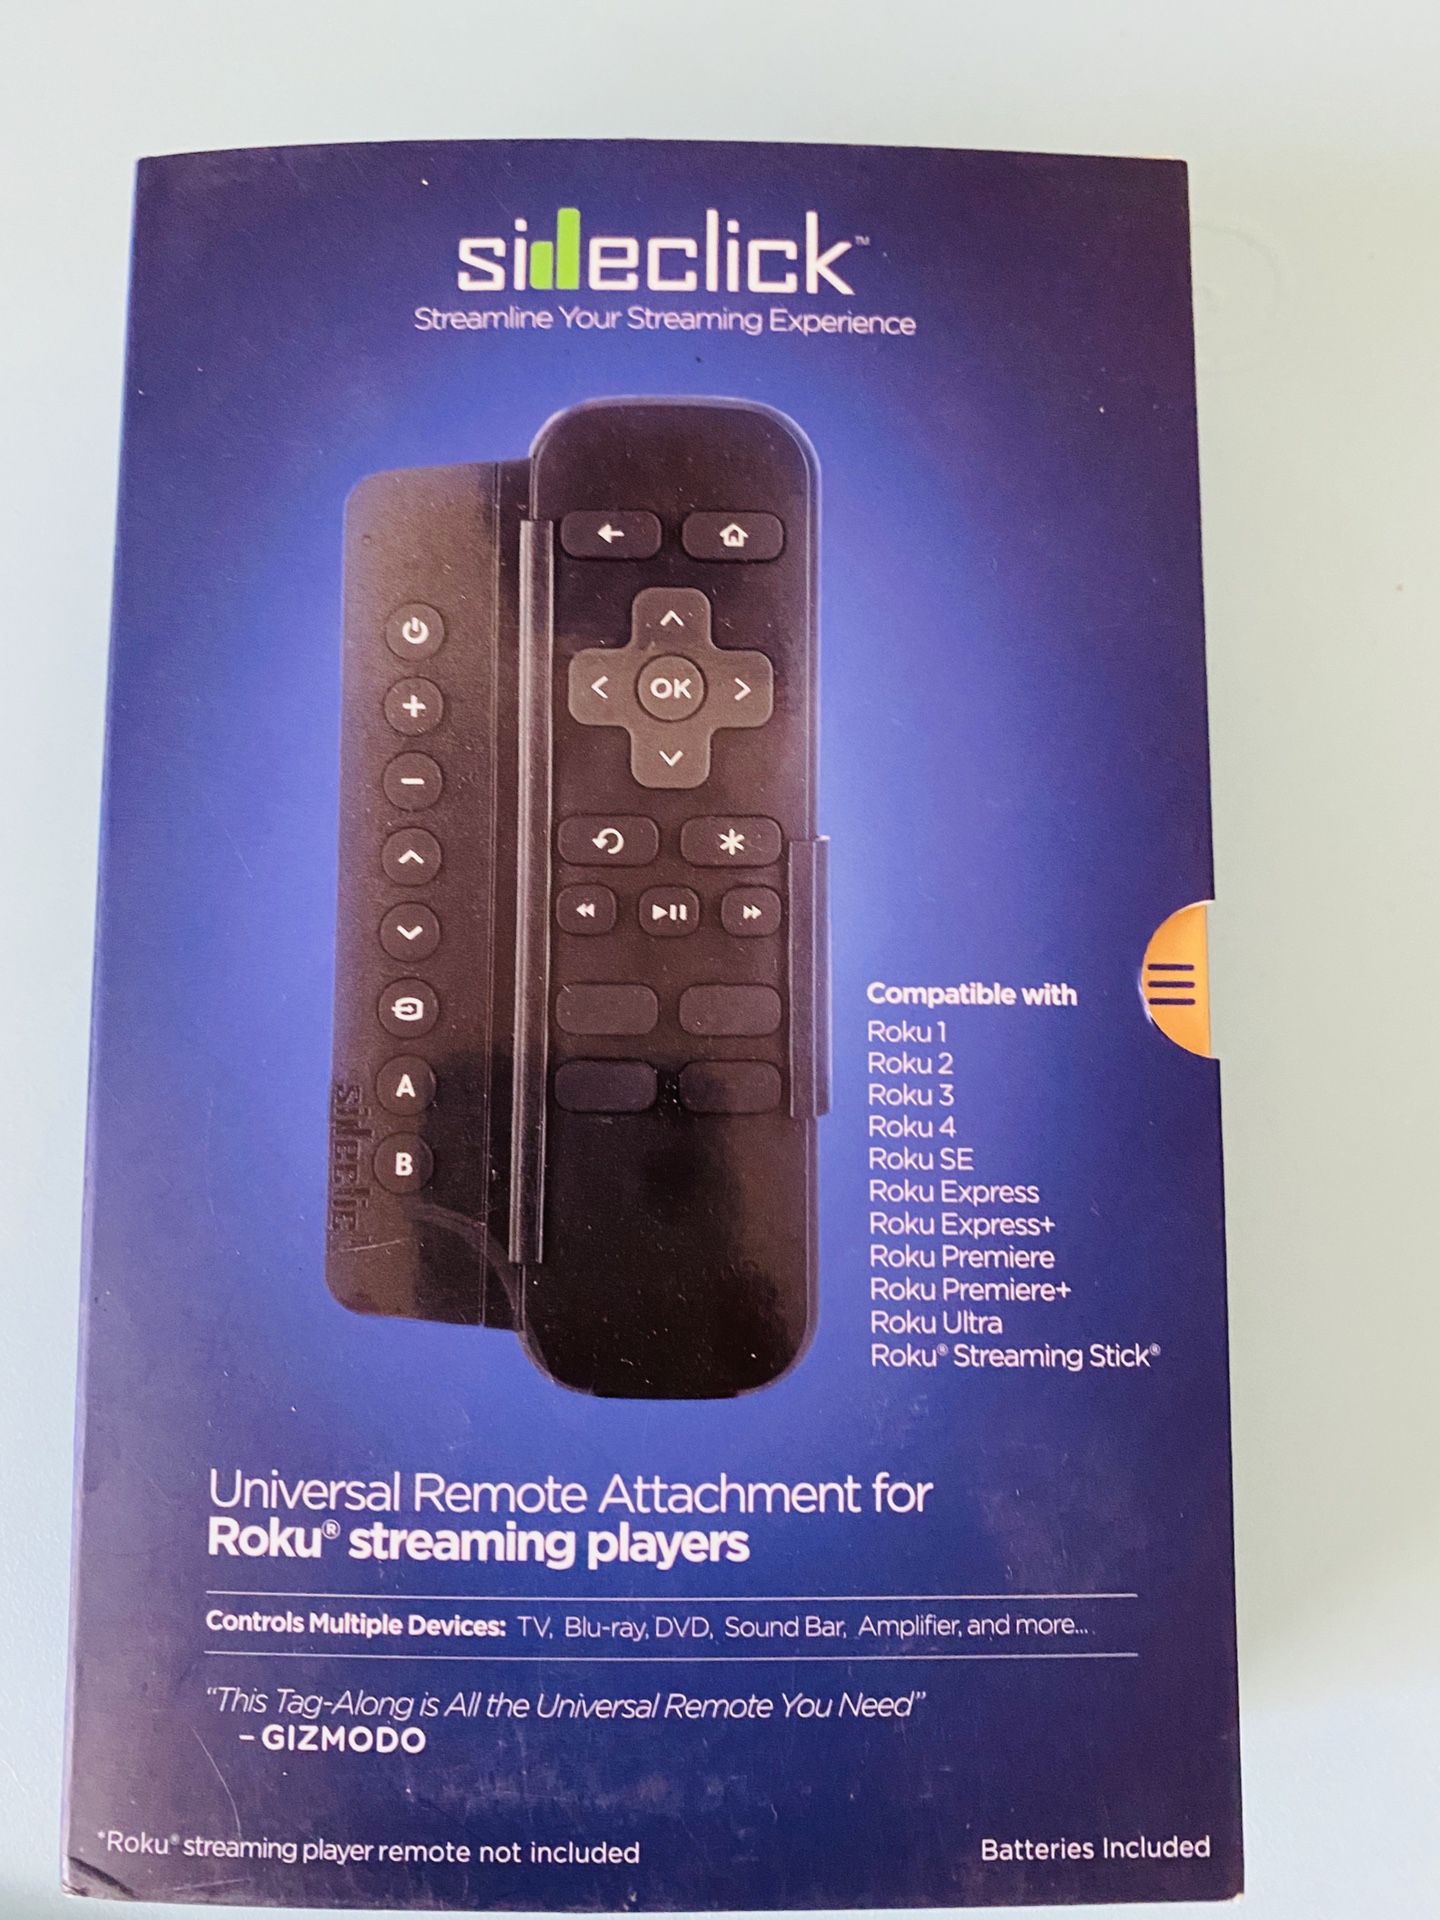 Sideclick universal remote for Roku